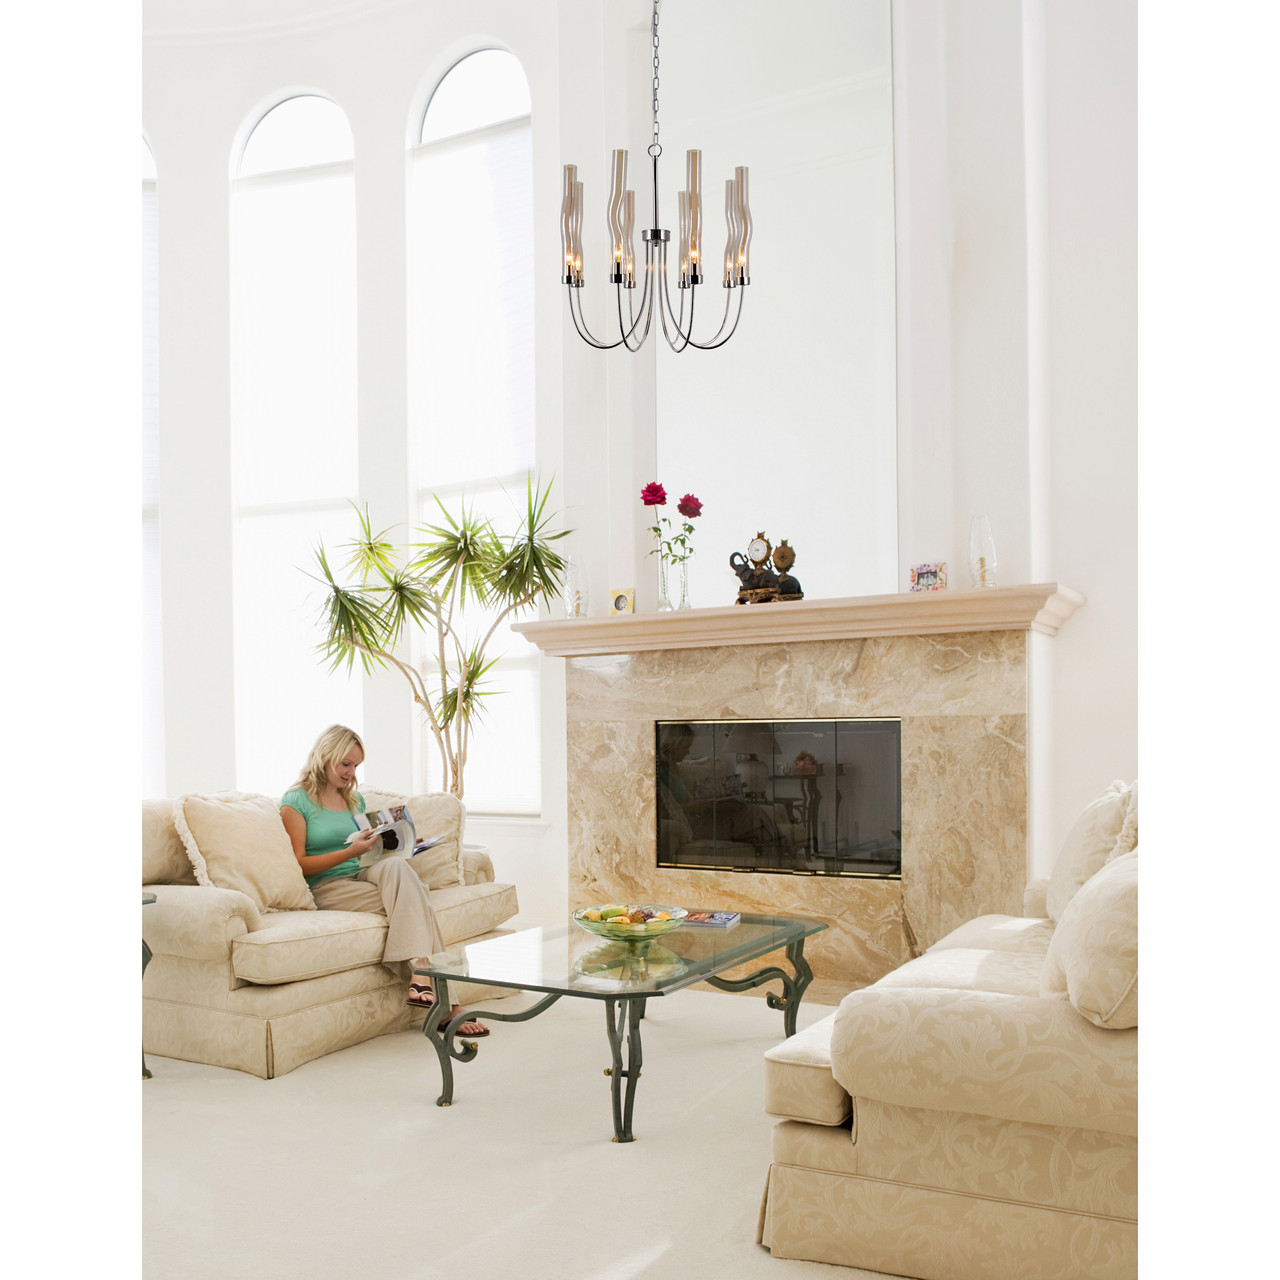 CWI LIGHTING 1203P21-8-613 8 Light Chandelier with Polished Nickel Finish